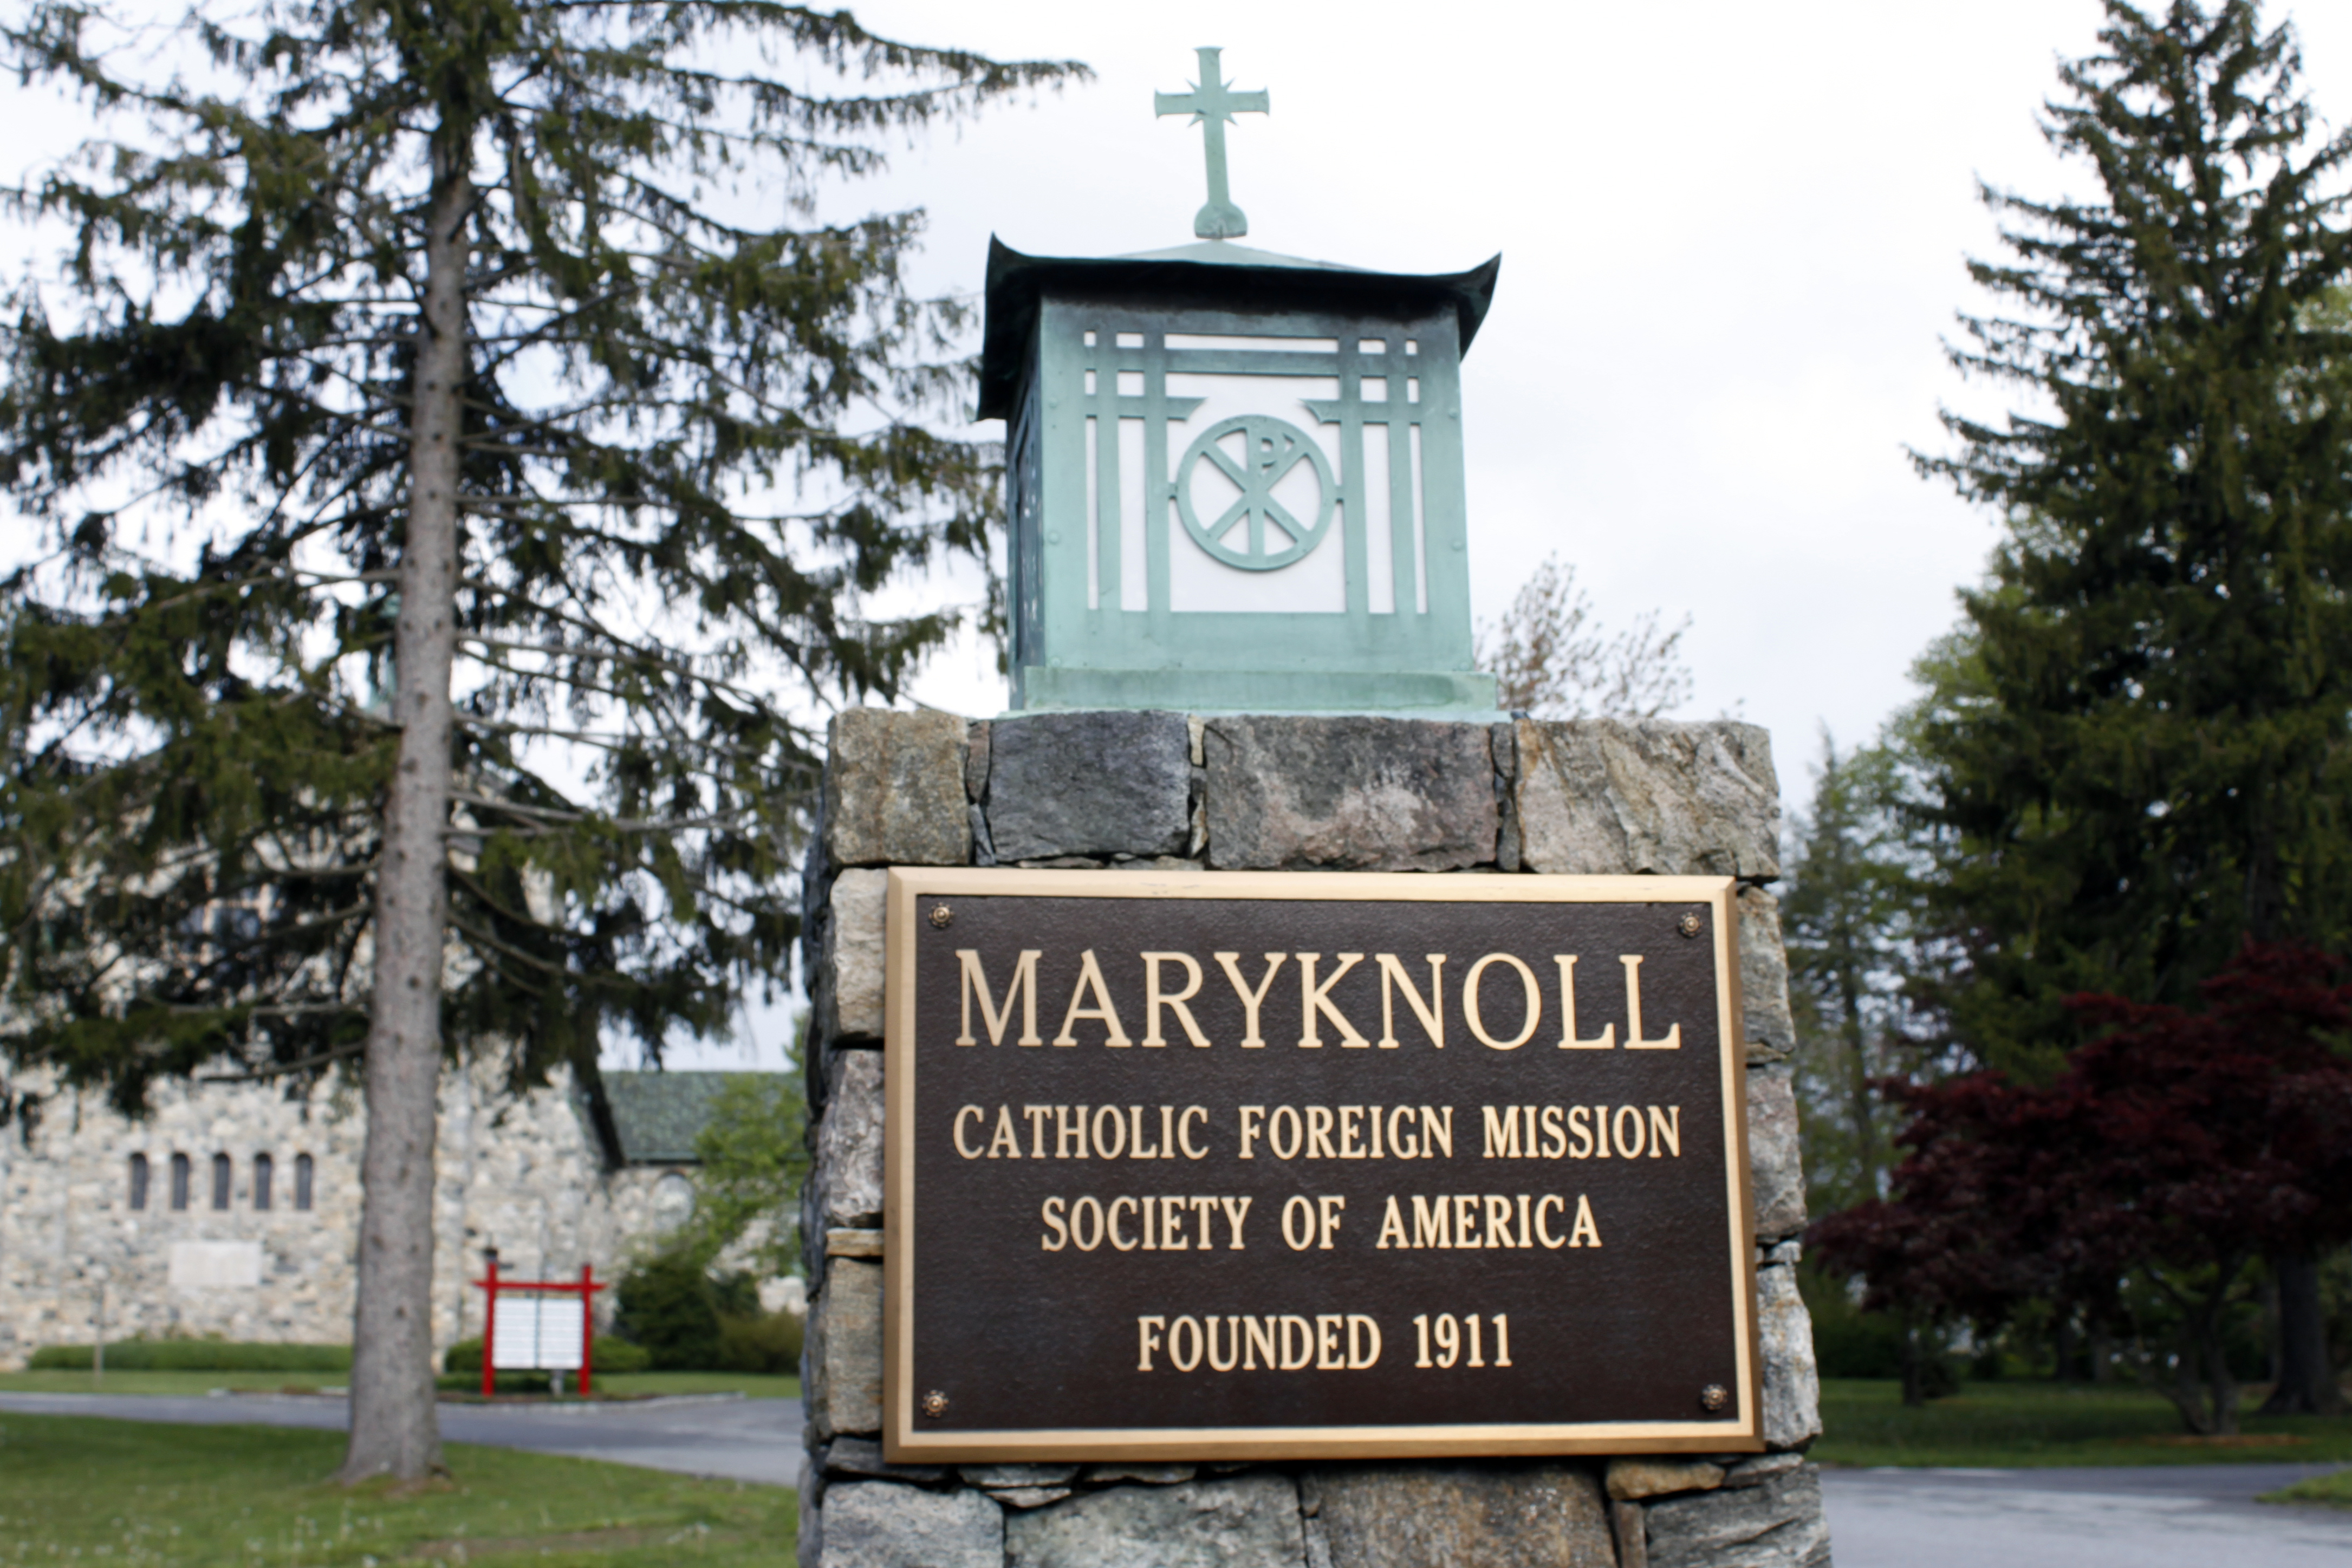 Maryknoll Images for the Press